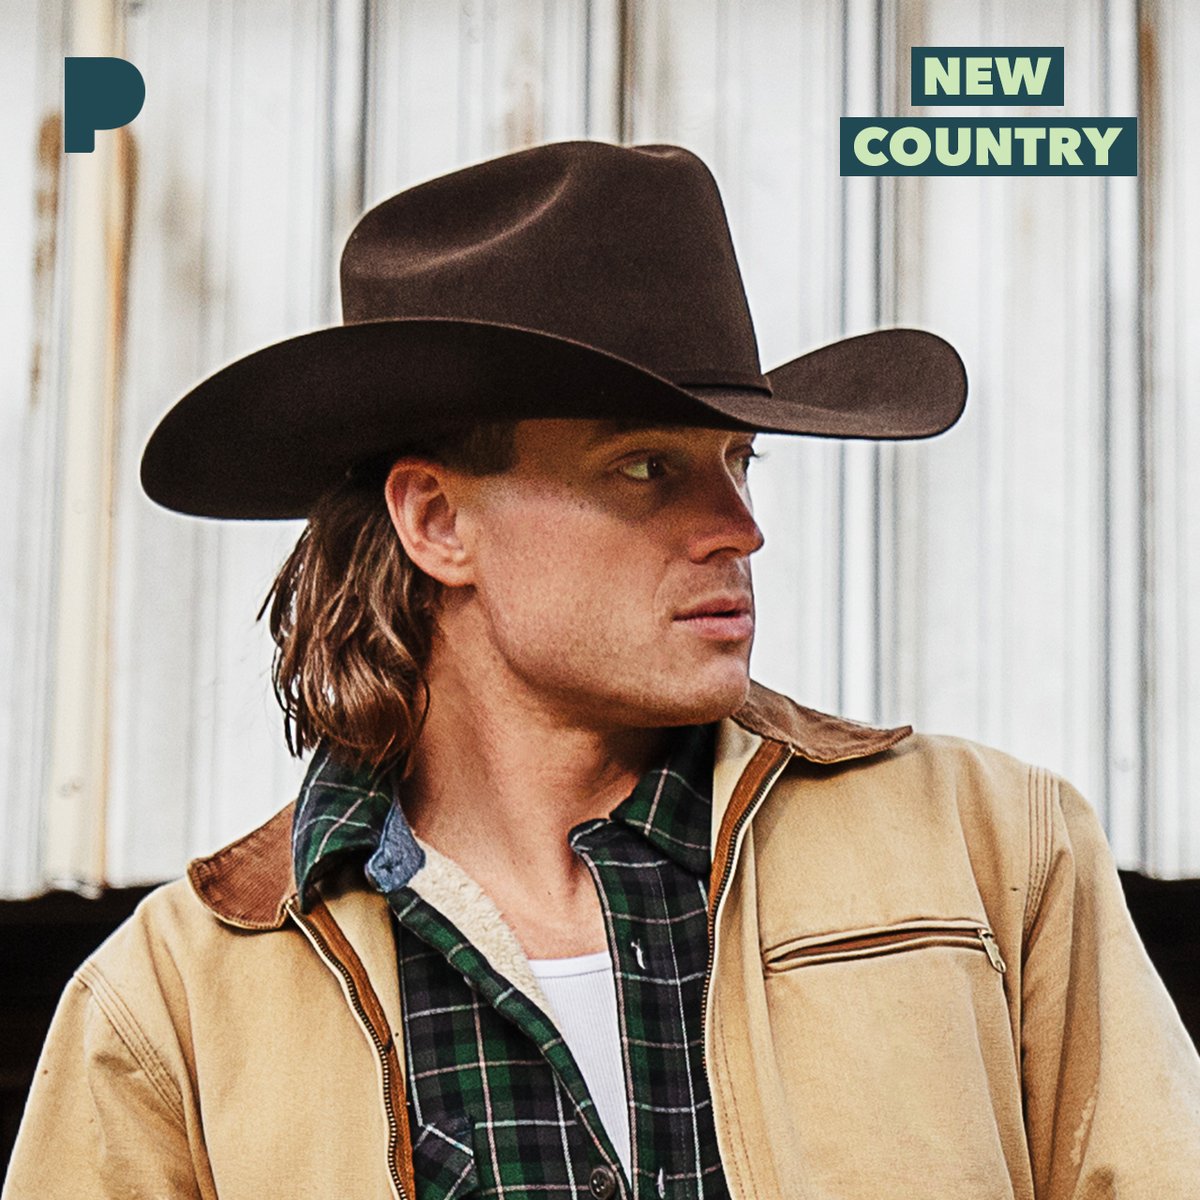 New Country 🤠 Thank you @pandoramusic for the playlist cover! If you’re in the U.S, head to the New Country playlist to check out Do It Anyway on @pandoramusic bit.ly/3PATvCx